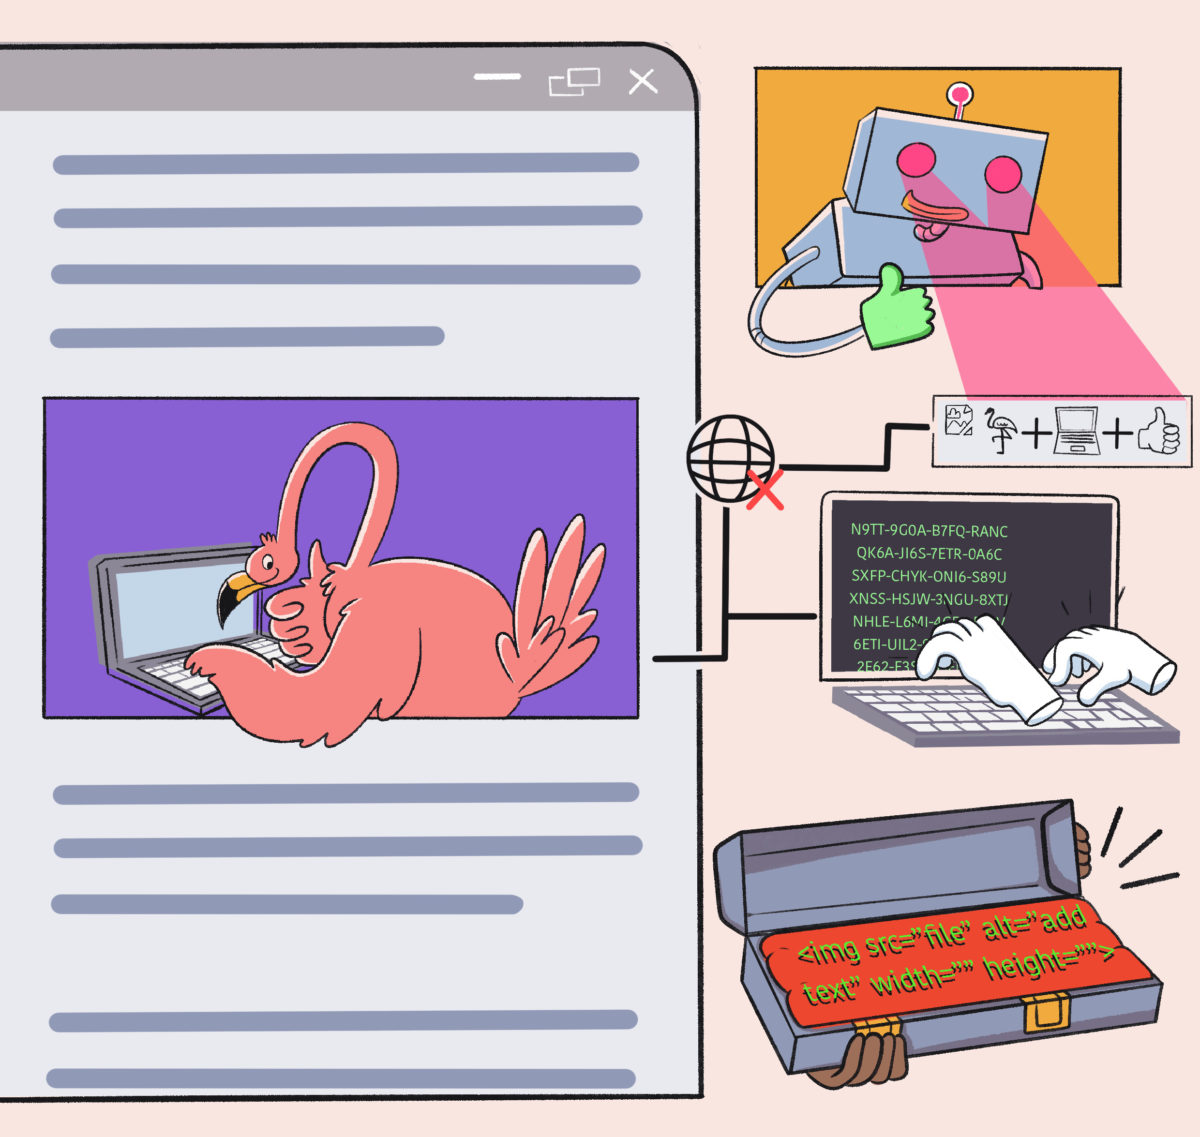 LinkGraph's flamingo mascot adding alt text to all of the images on his website to improve accessibility